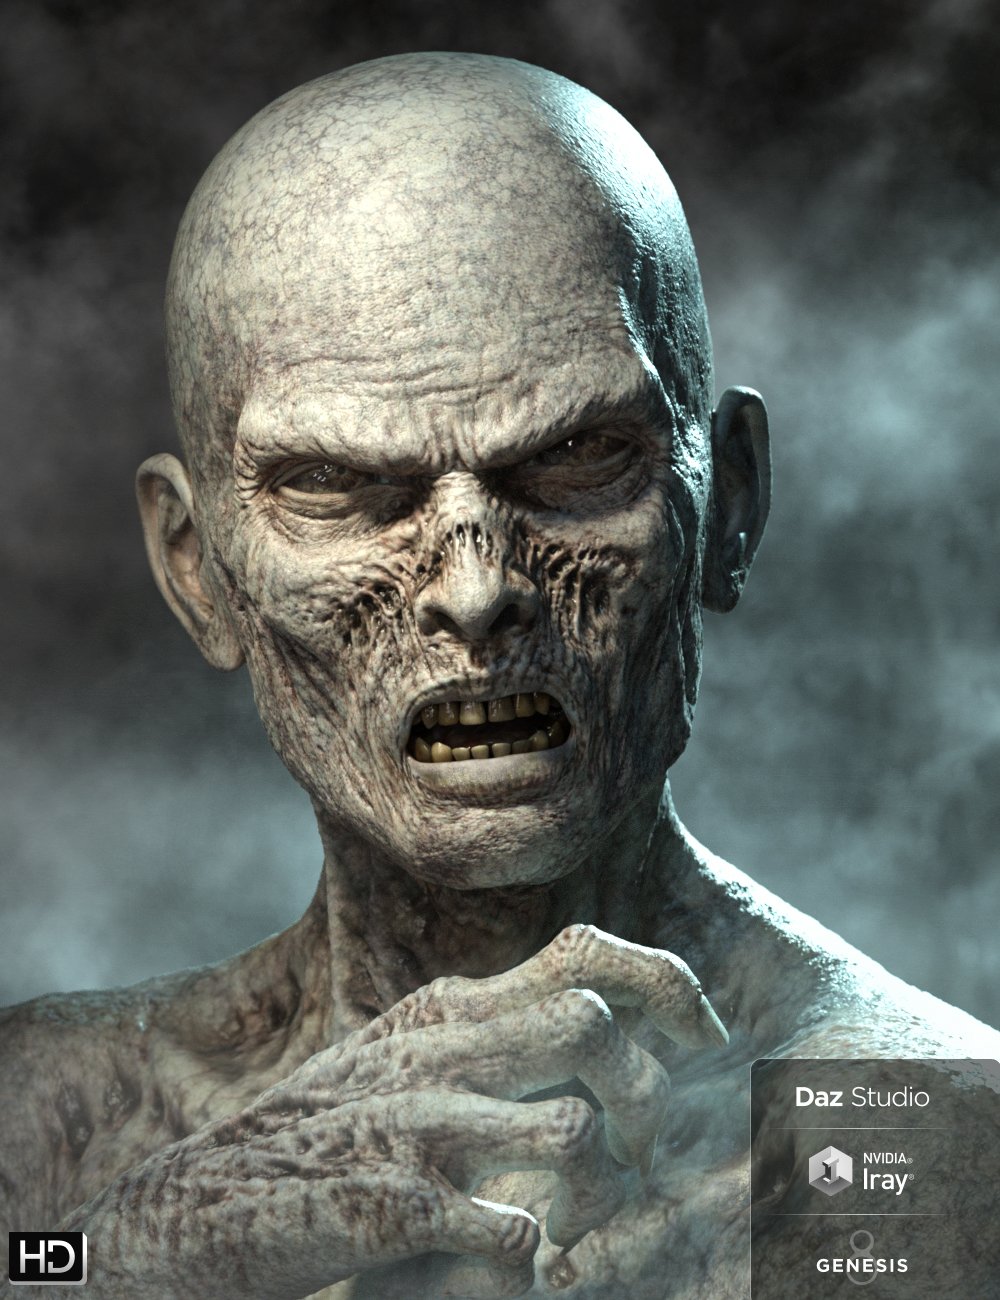 Ultimate Zombie Hd For Genesis 8 Male 3d Models And 3d Software By Daz 3d